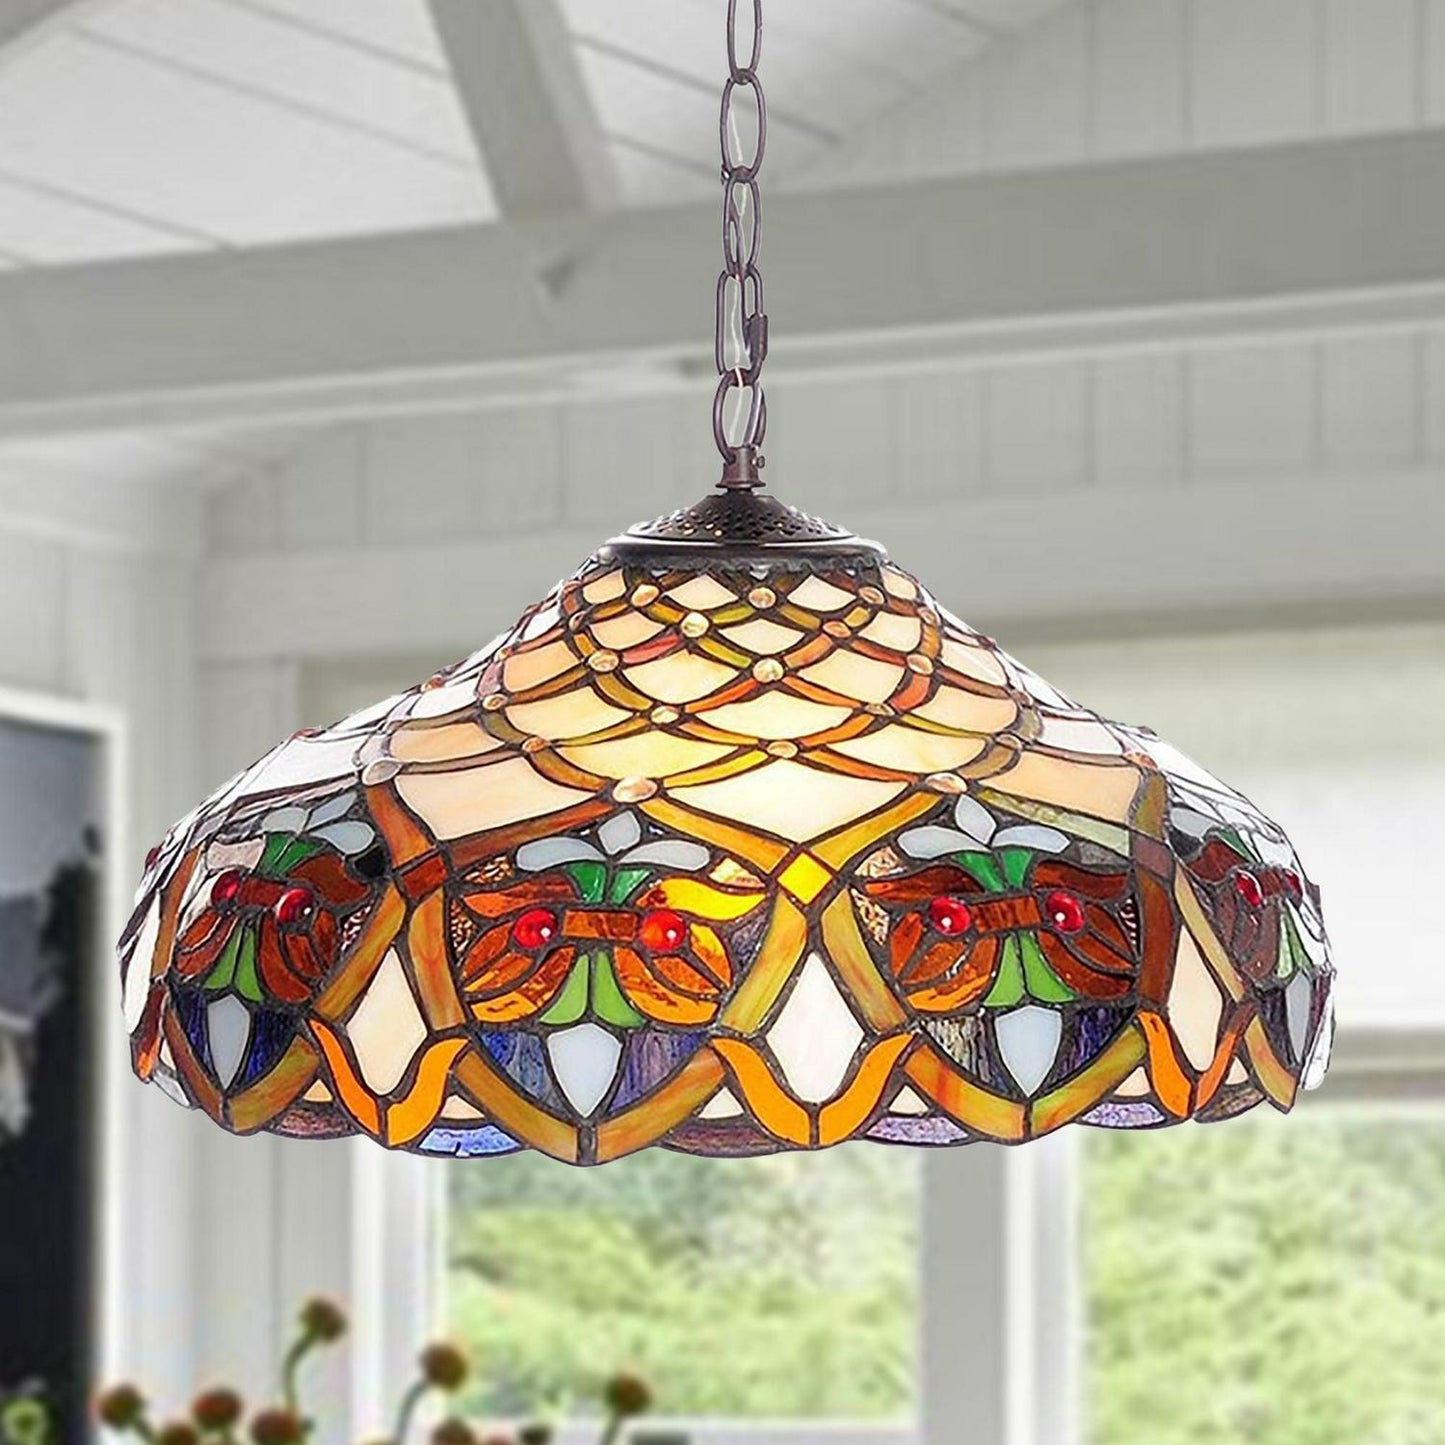 Tiffany Style Baroque Theme Stained Glass Hanging Ceiling Pendant Light